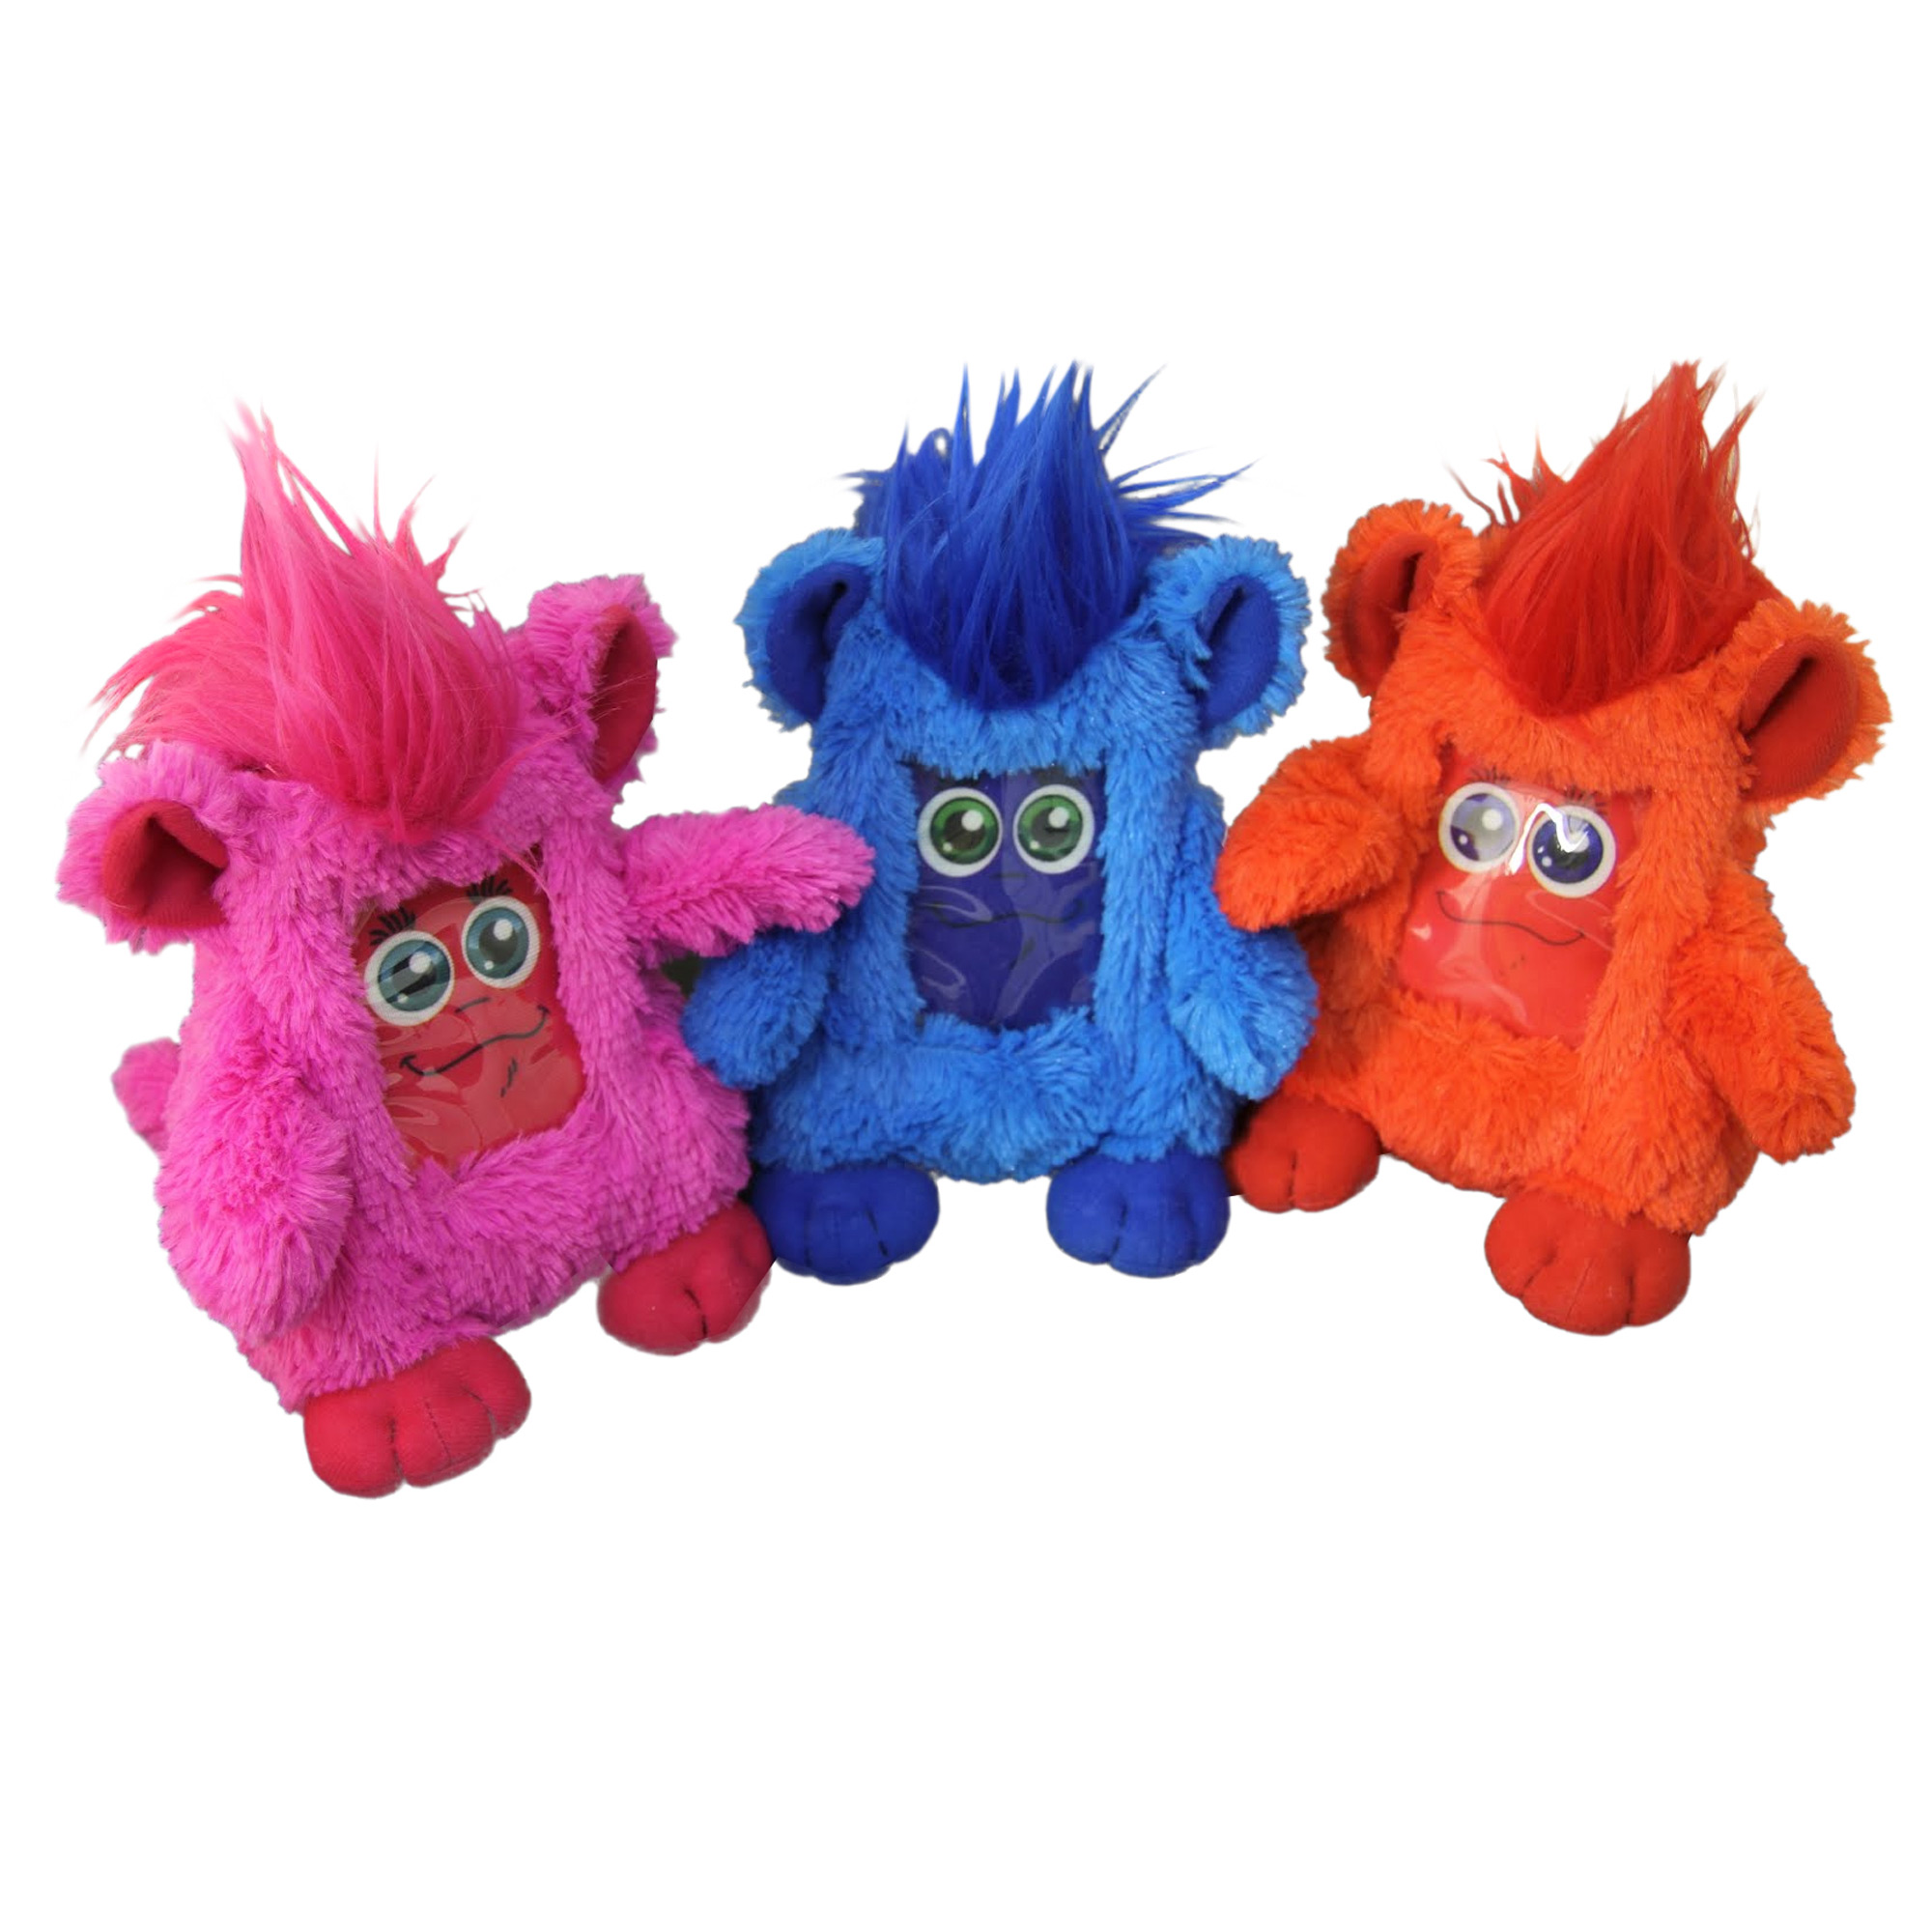 Stockists of Applingz Interactive Cuddly Toy